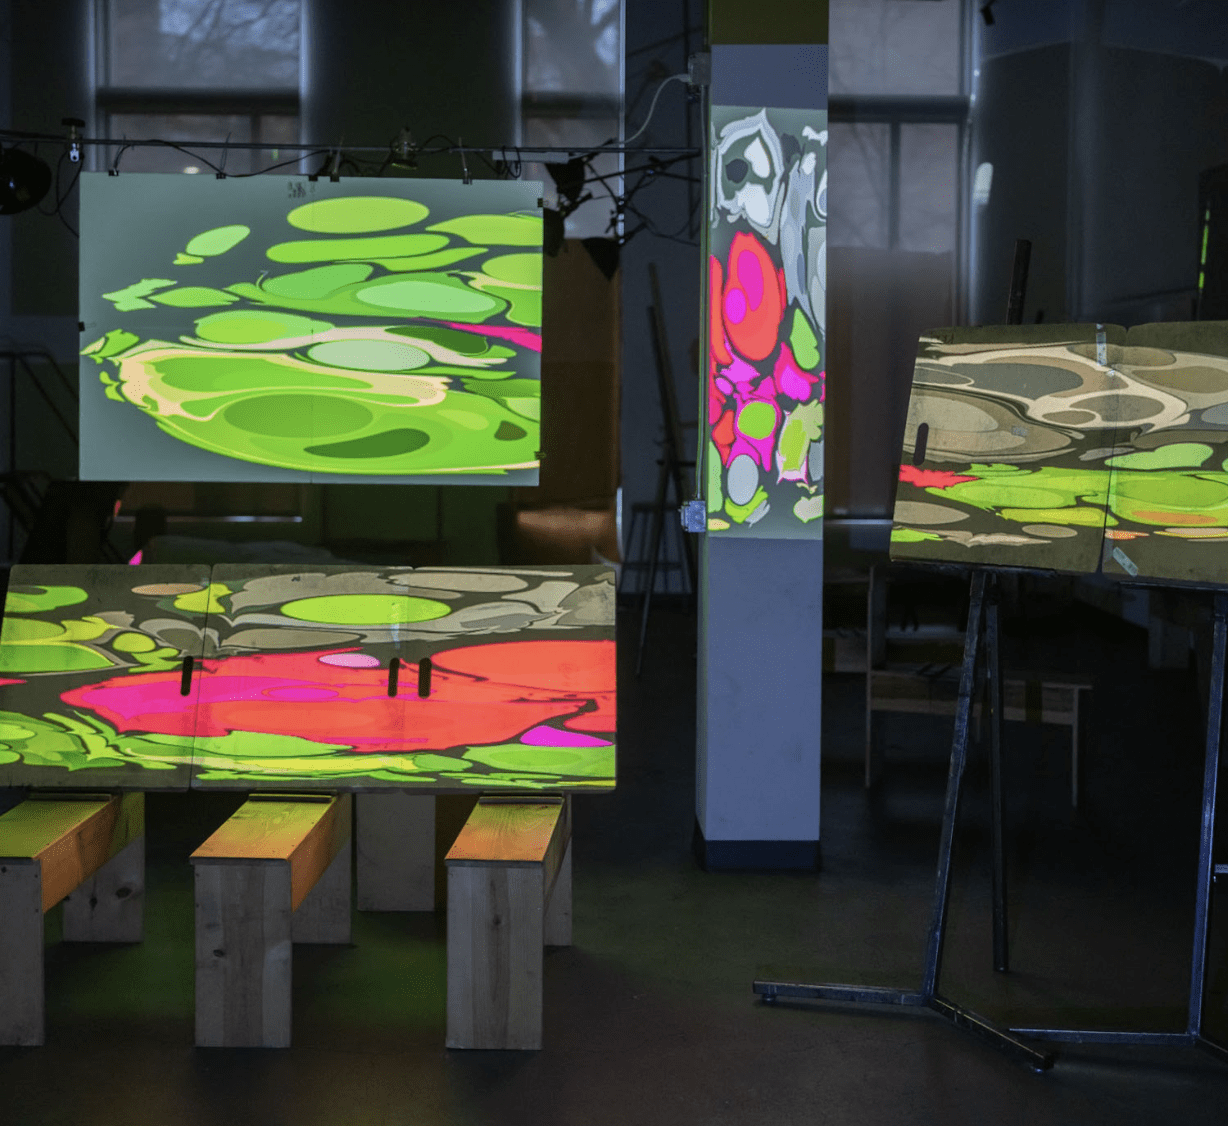 Several pedestals and benches are arranged in the room. Each stand holds a canvas. Videos of dripping color are projection mapped onto each of the canvases